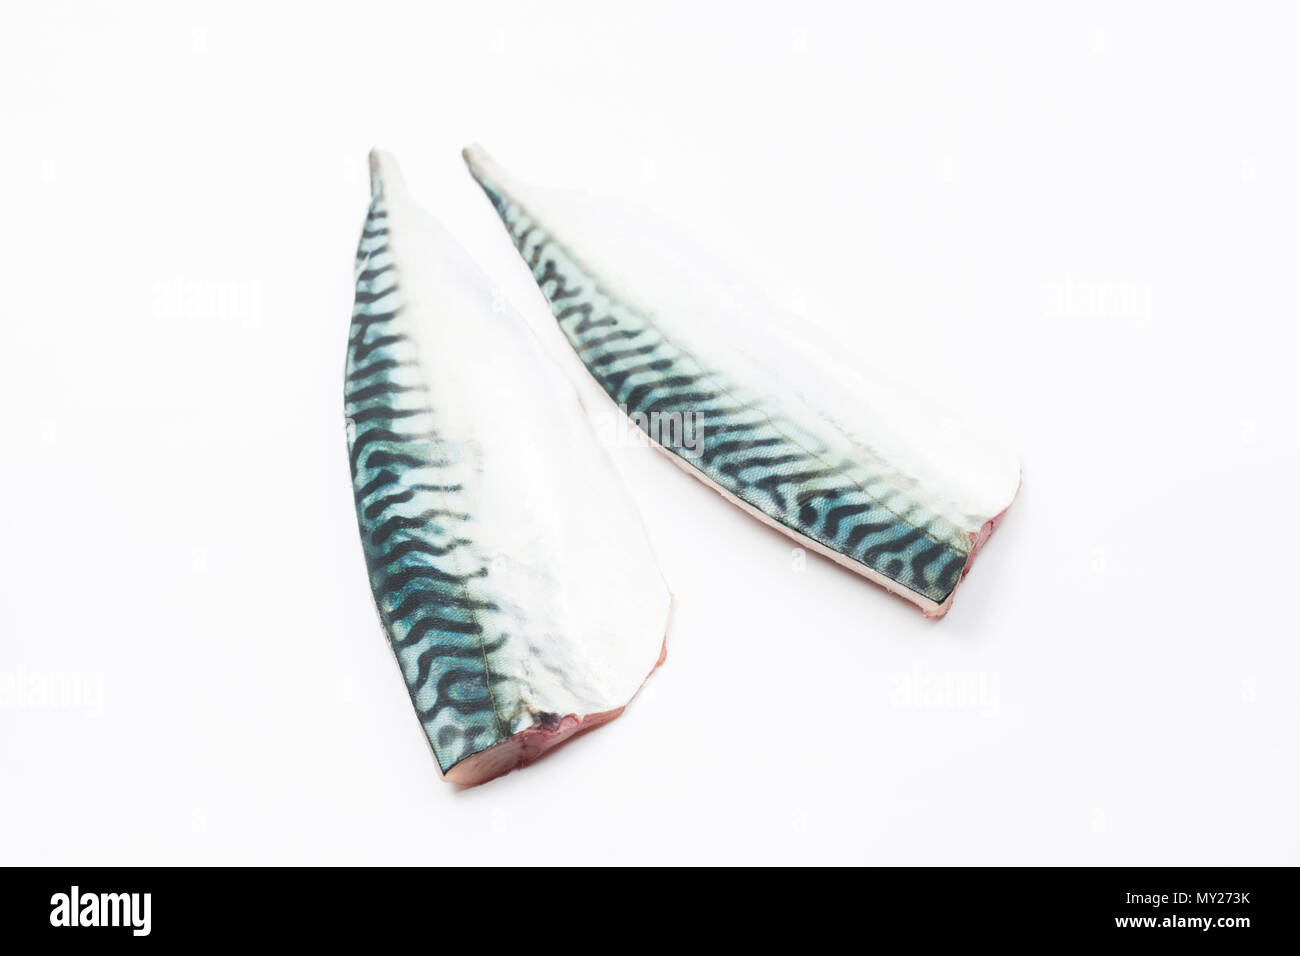 A pair of fresh, raw mackerel fillets on a white background from a mackerel caught from Chesil beach in Dorset on rod and line. Picture shows them ski Stock Photo